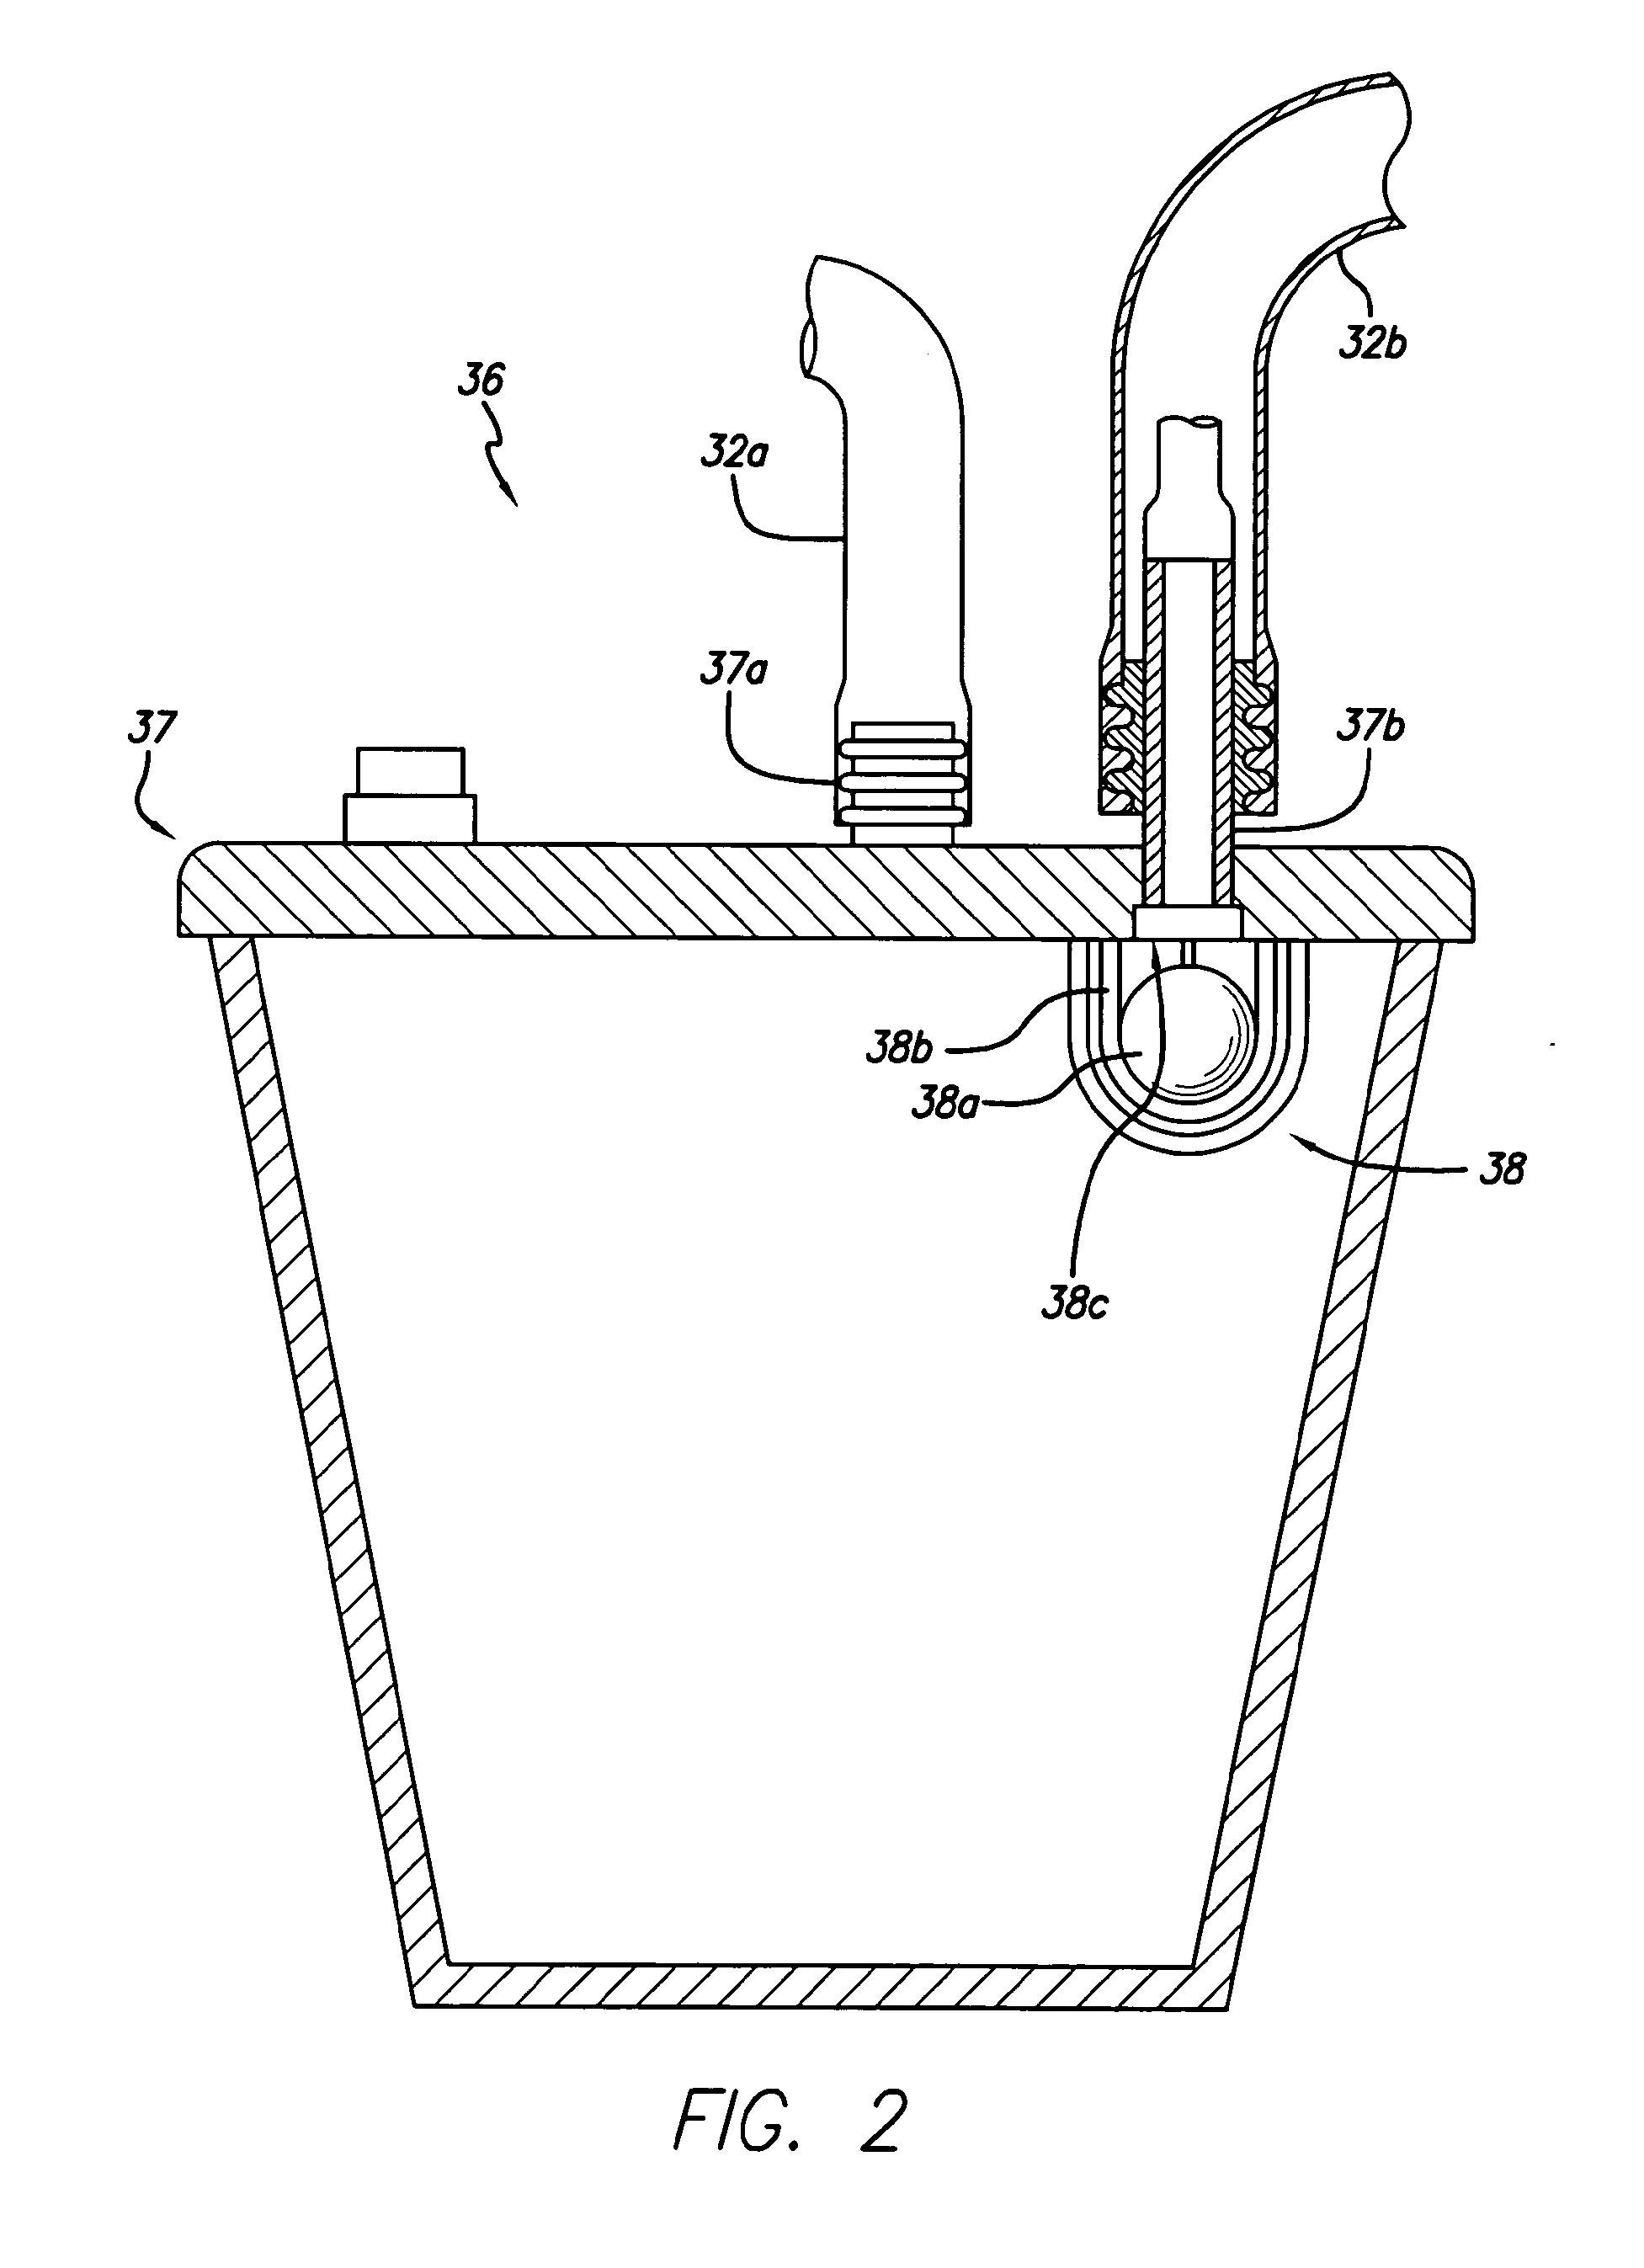 Hypobaric chamber treatment system